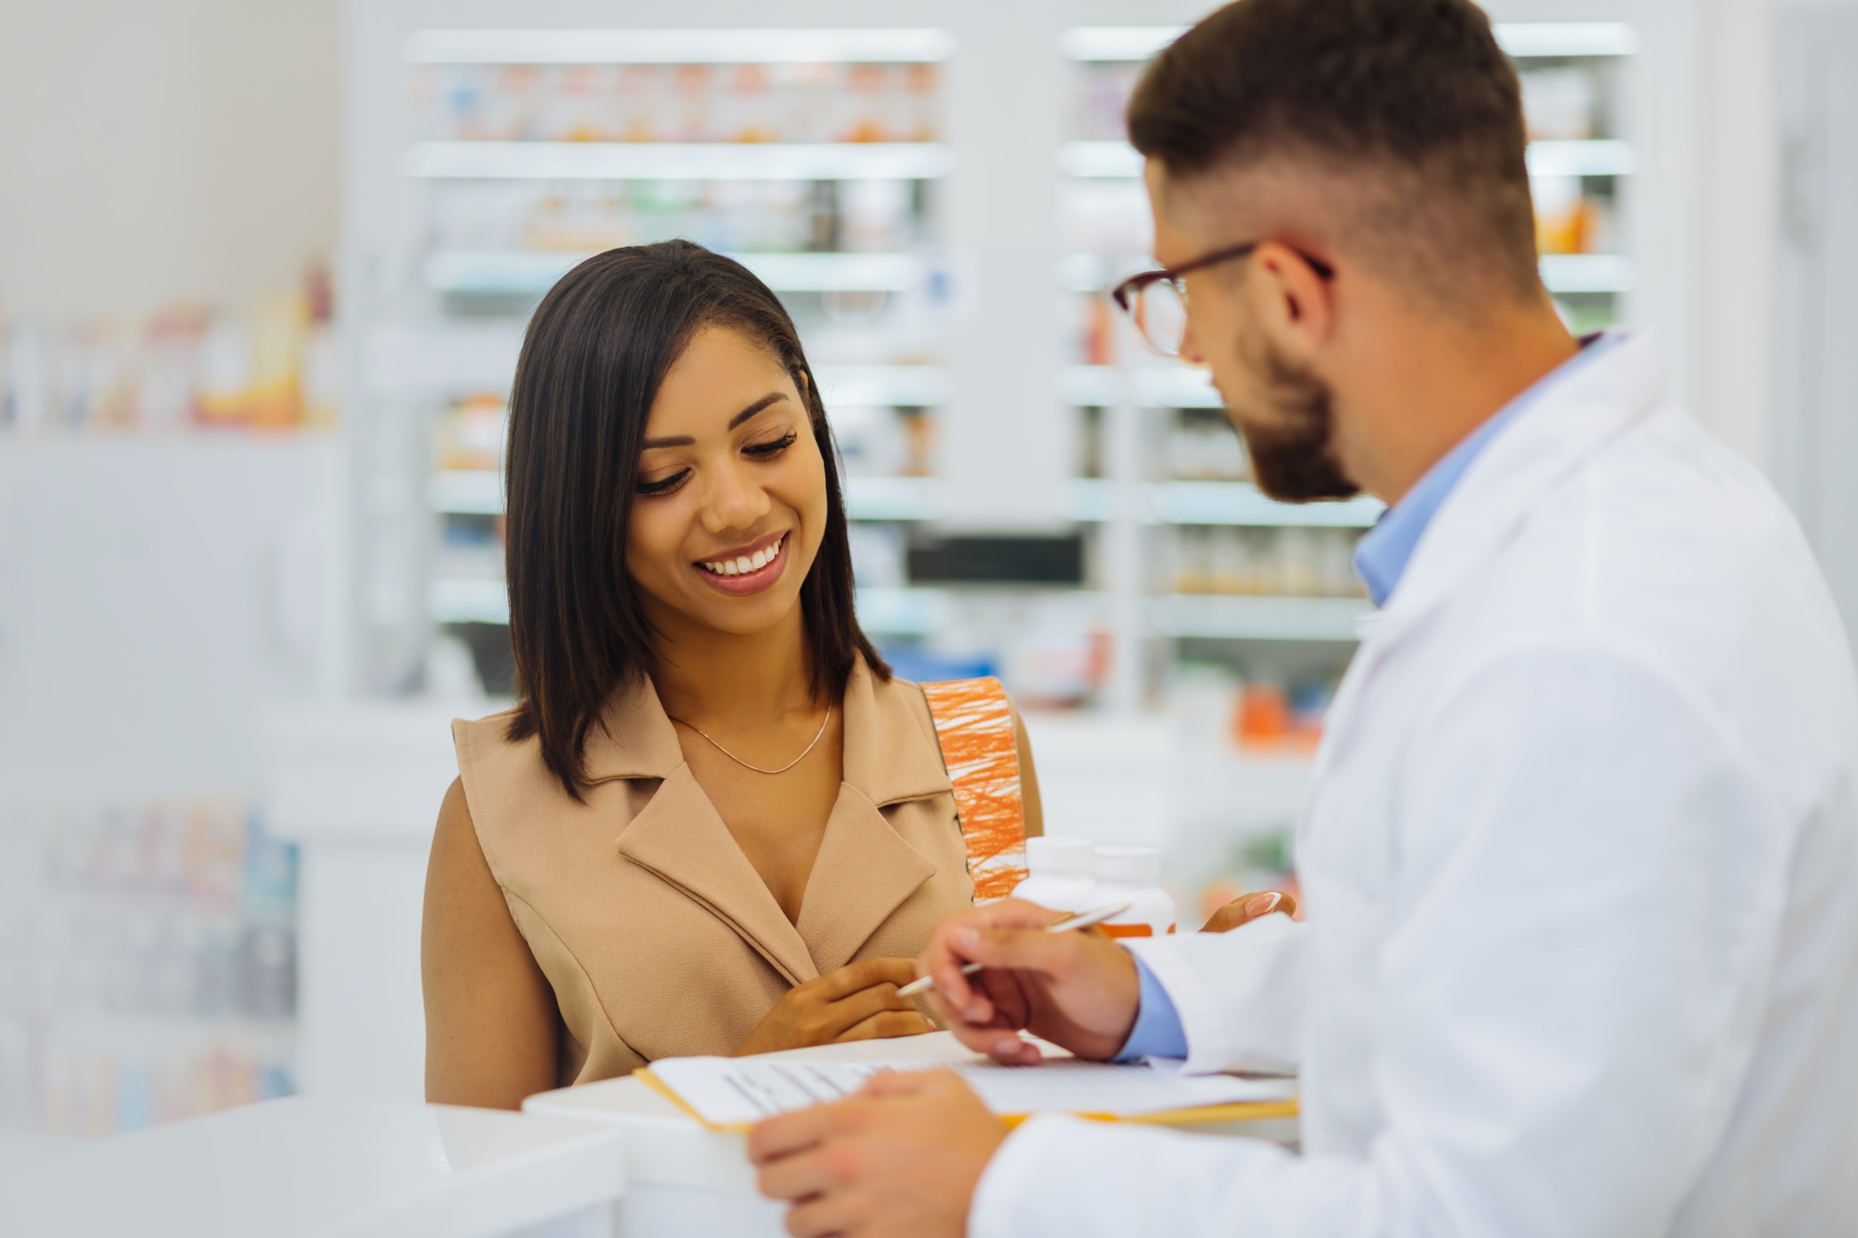 walkers medical pharmacy - prescribing pharmacist for common health issues